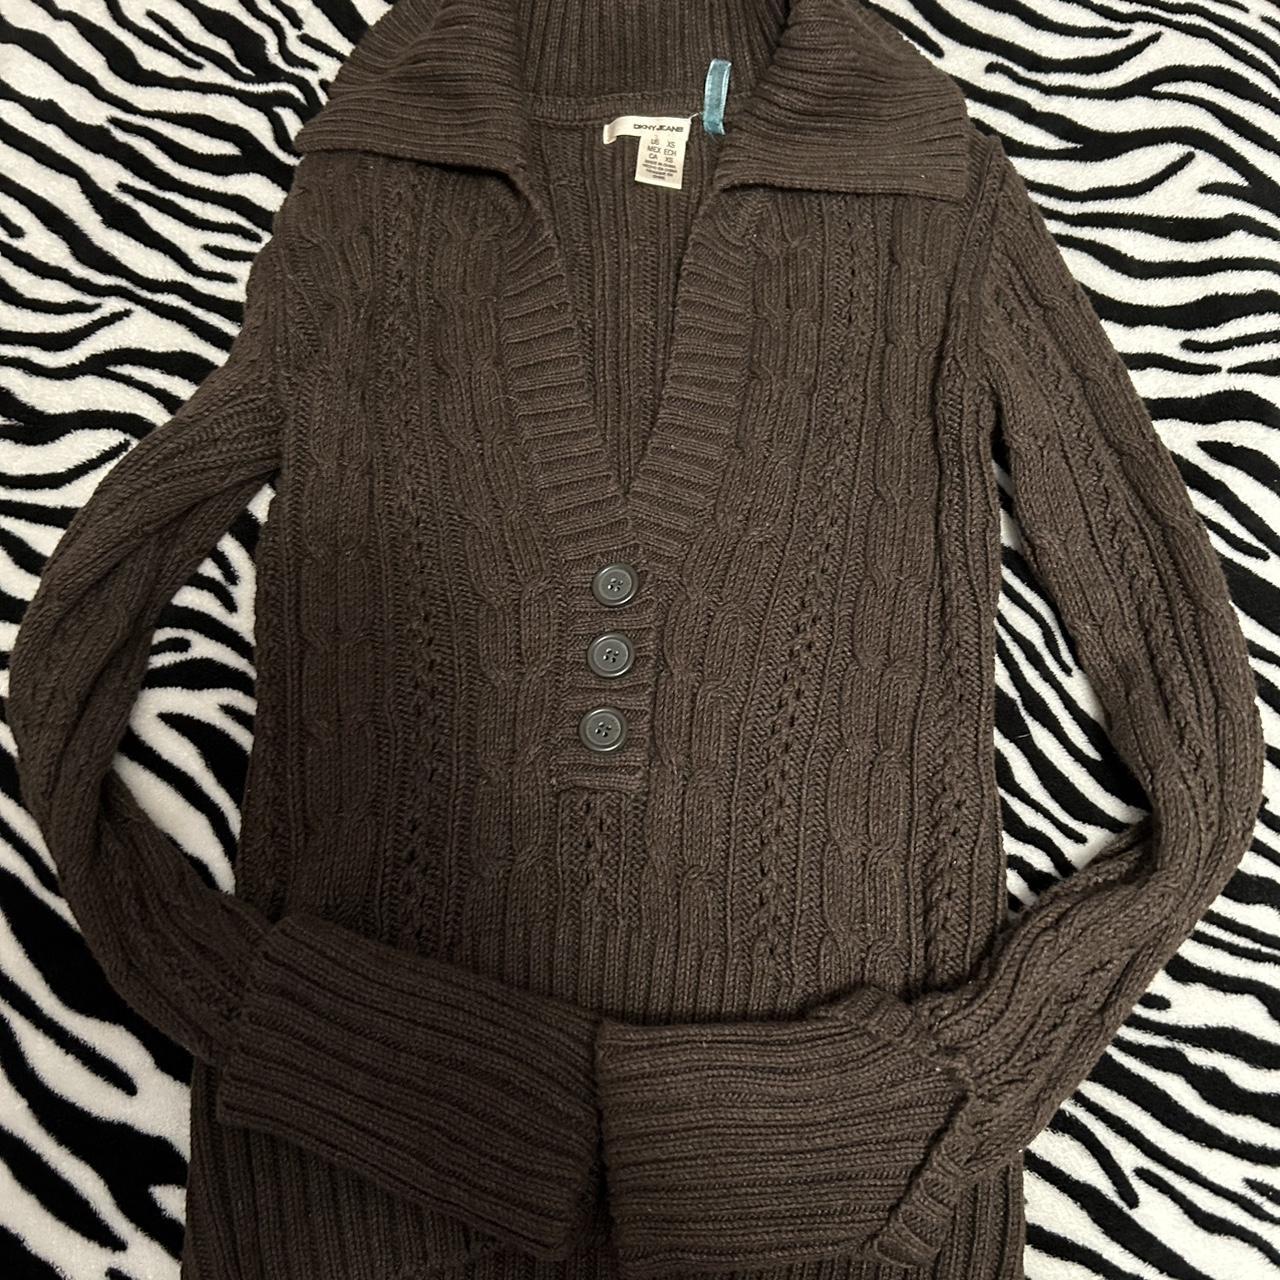 DKNY Jeans Vintage With Buttons Cardigans Size Extra... - Depop